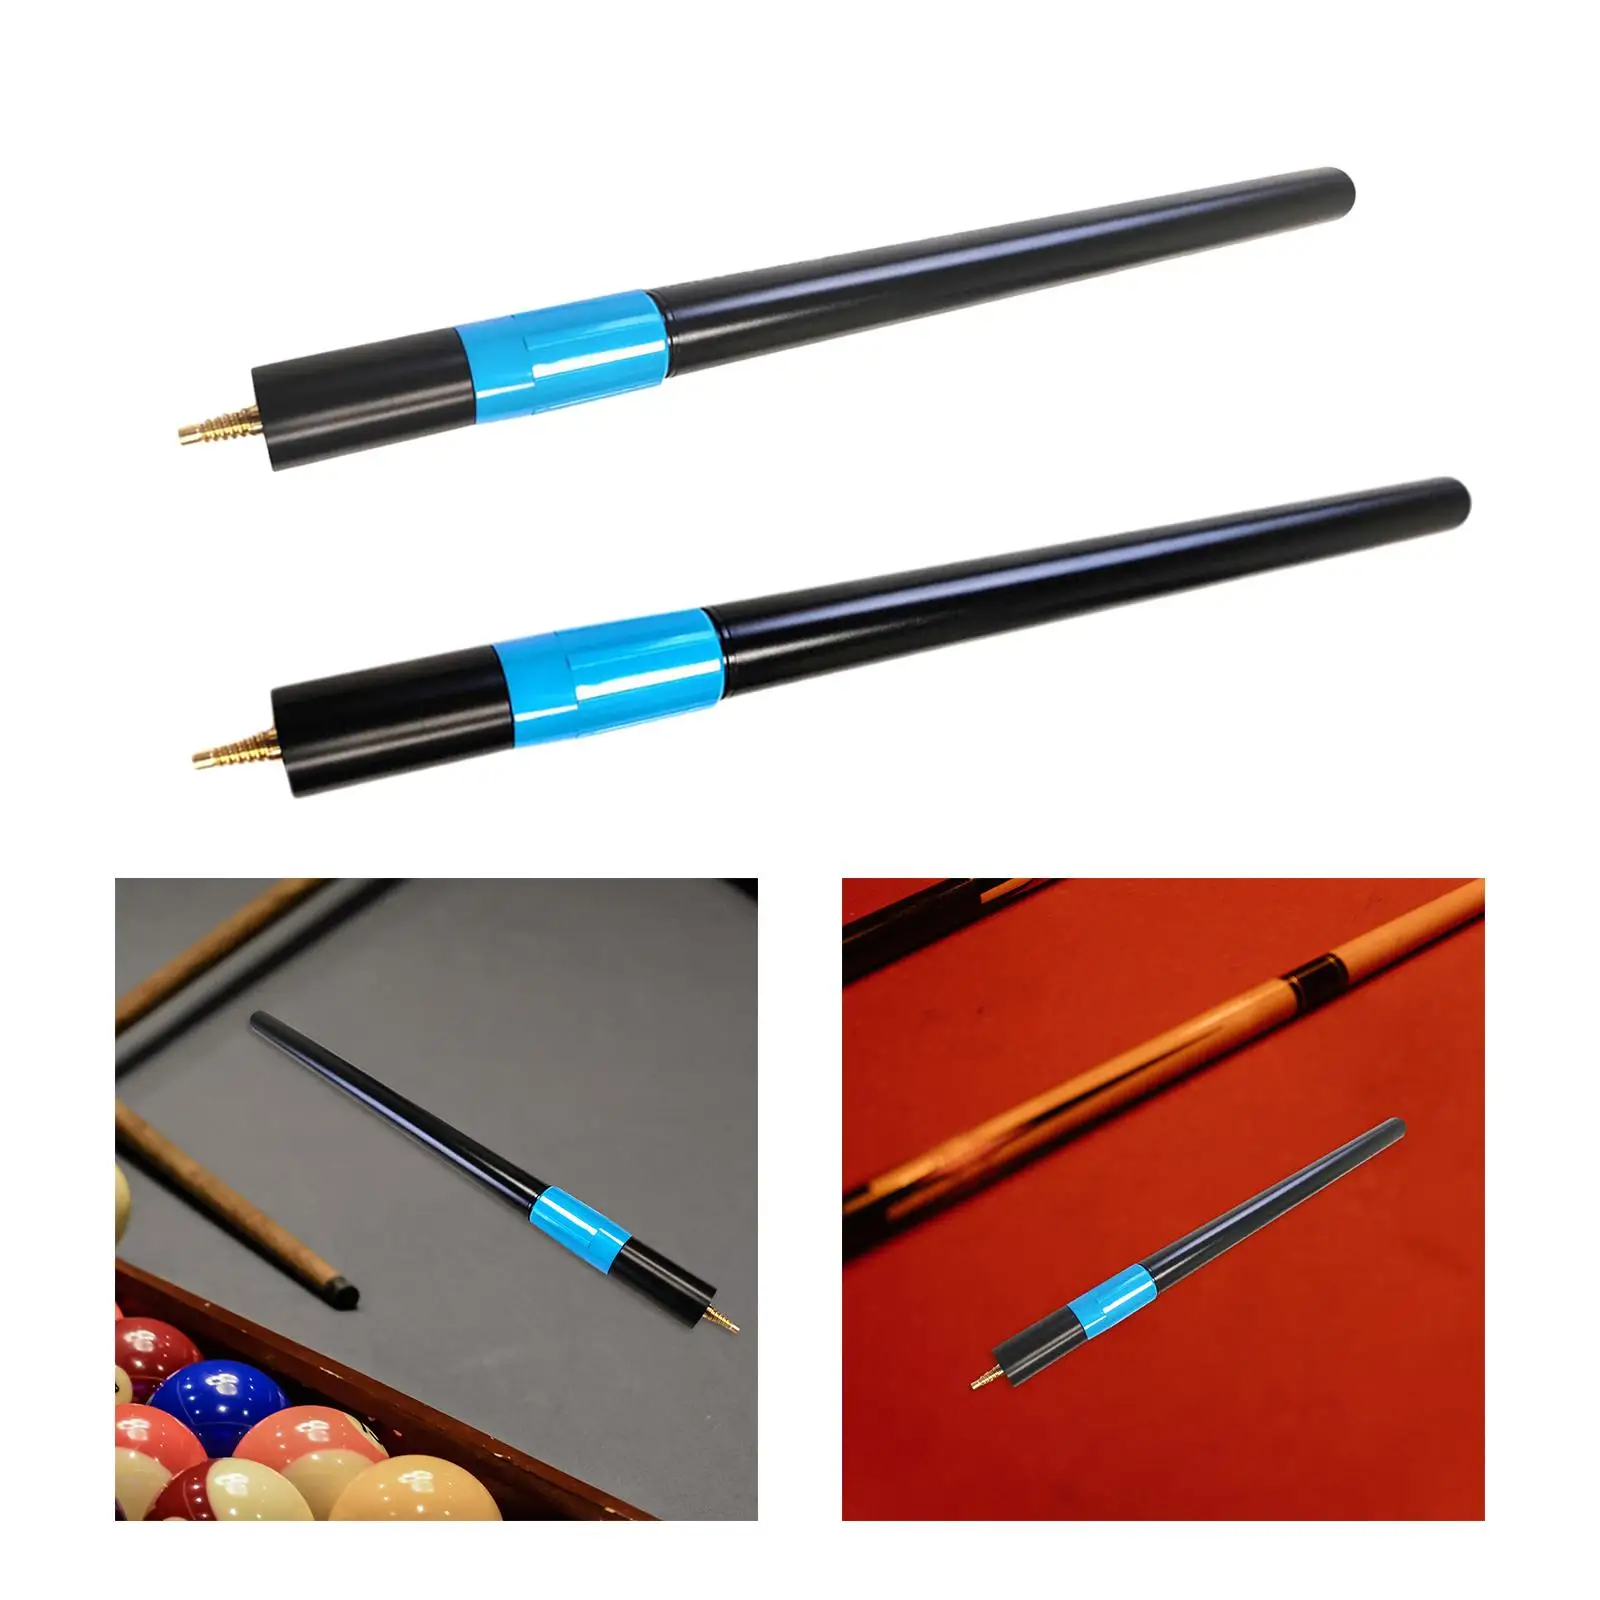 Snooker Pool Cue Extension, Professional High Strength Training Tool Lightweight Telescopic Billiard Cue Extension Accessory